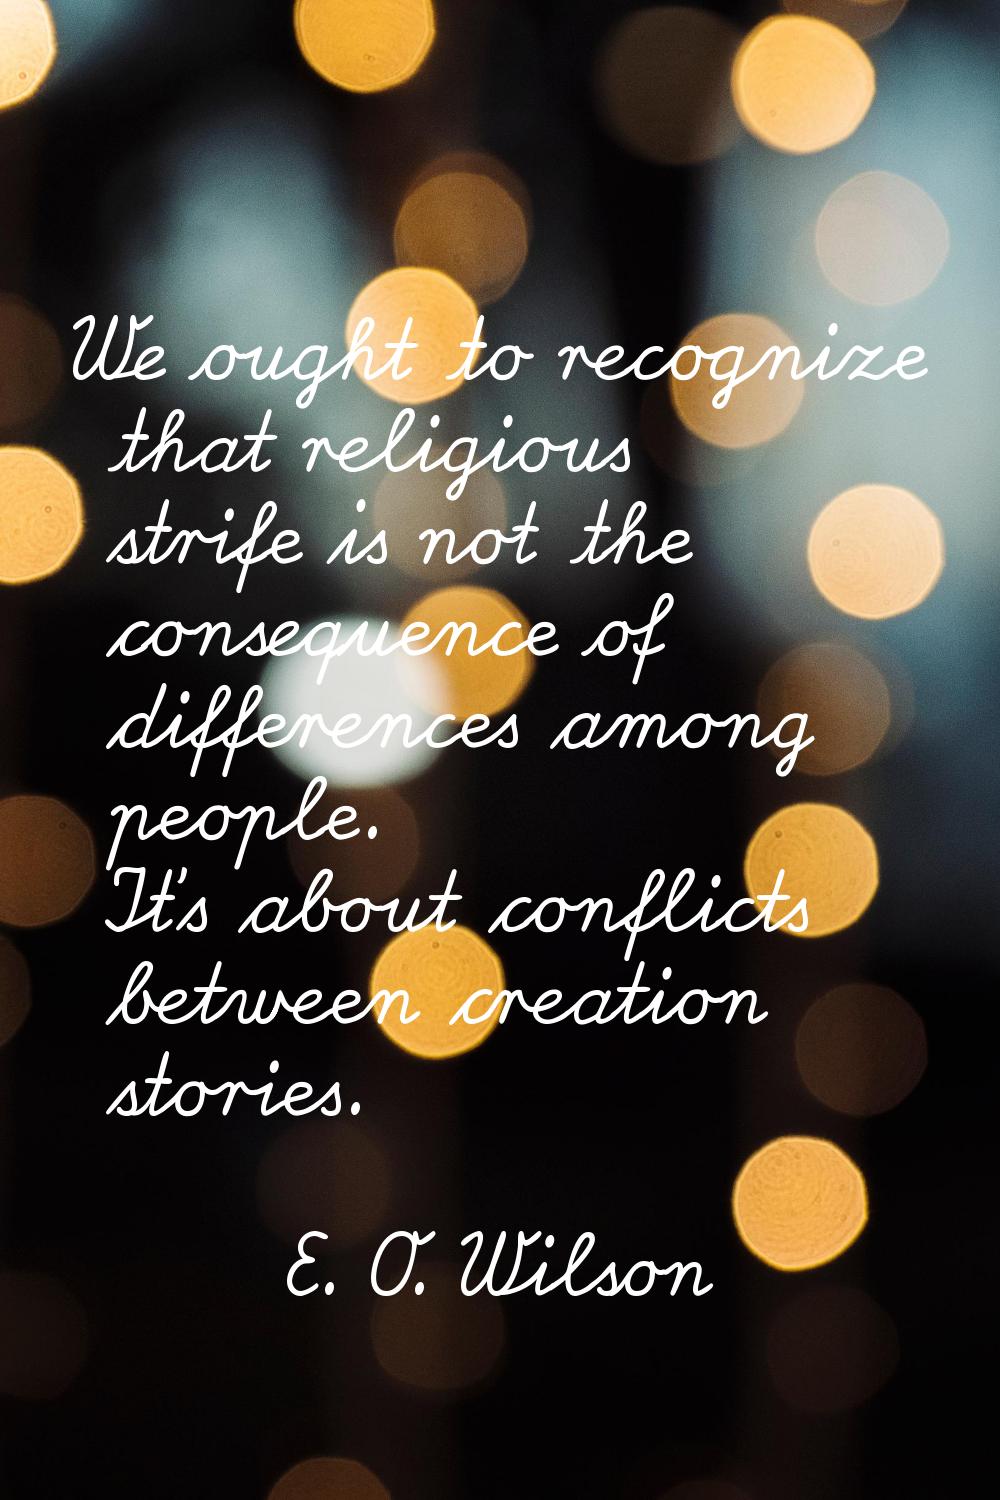 We ought to recognize that religious strife is not the consequence of differences among people. It'